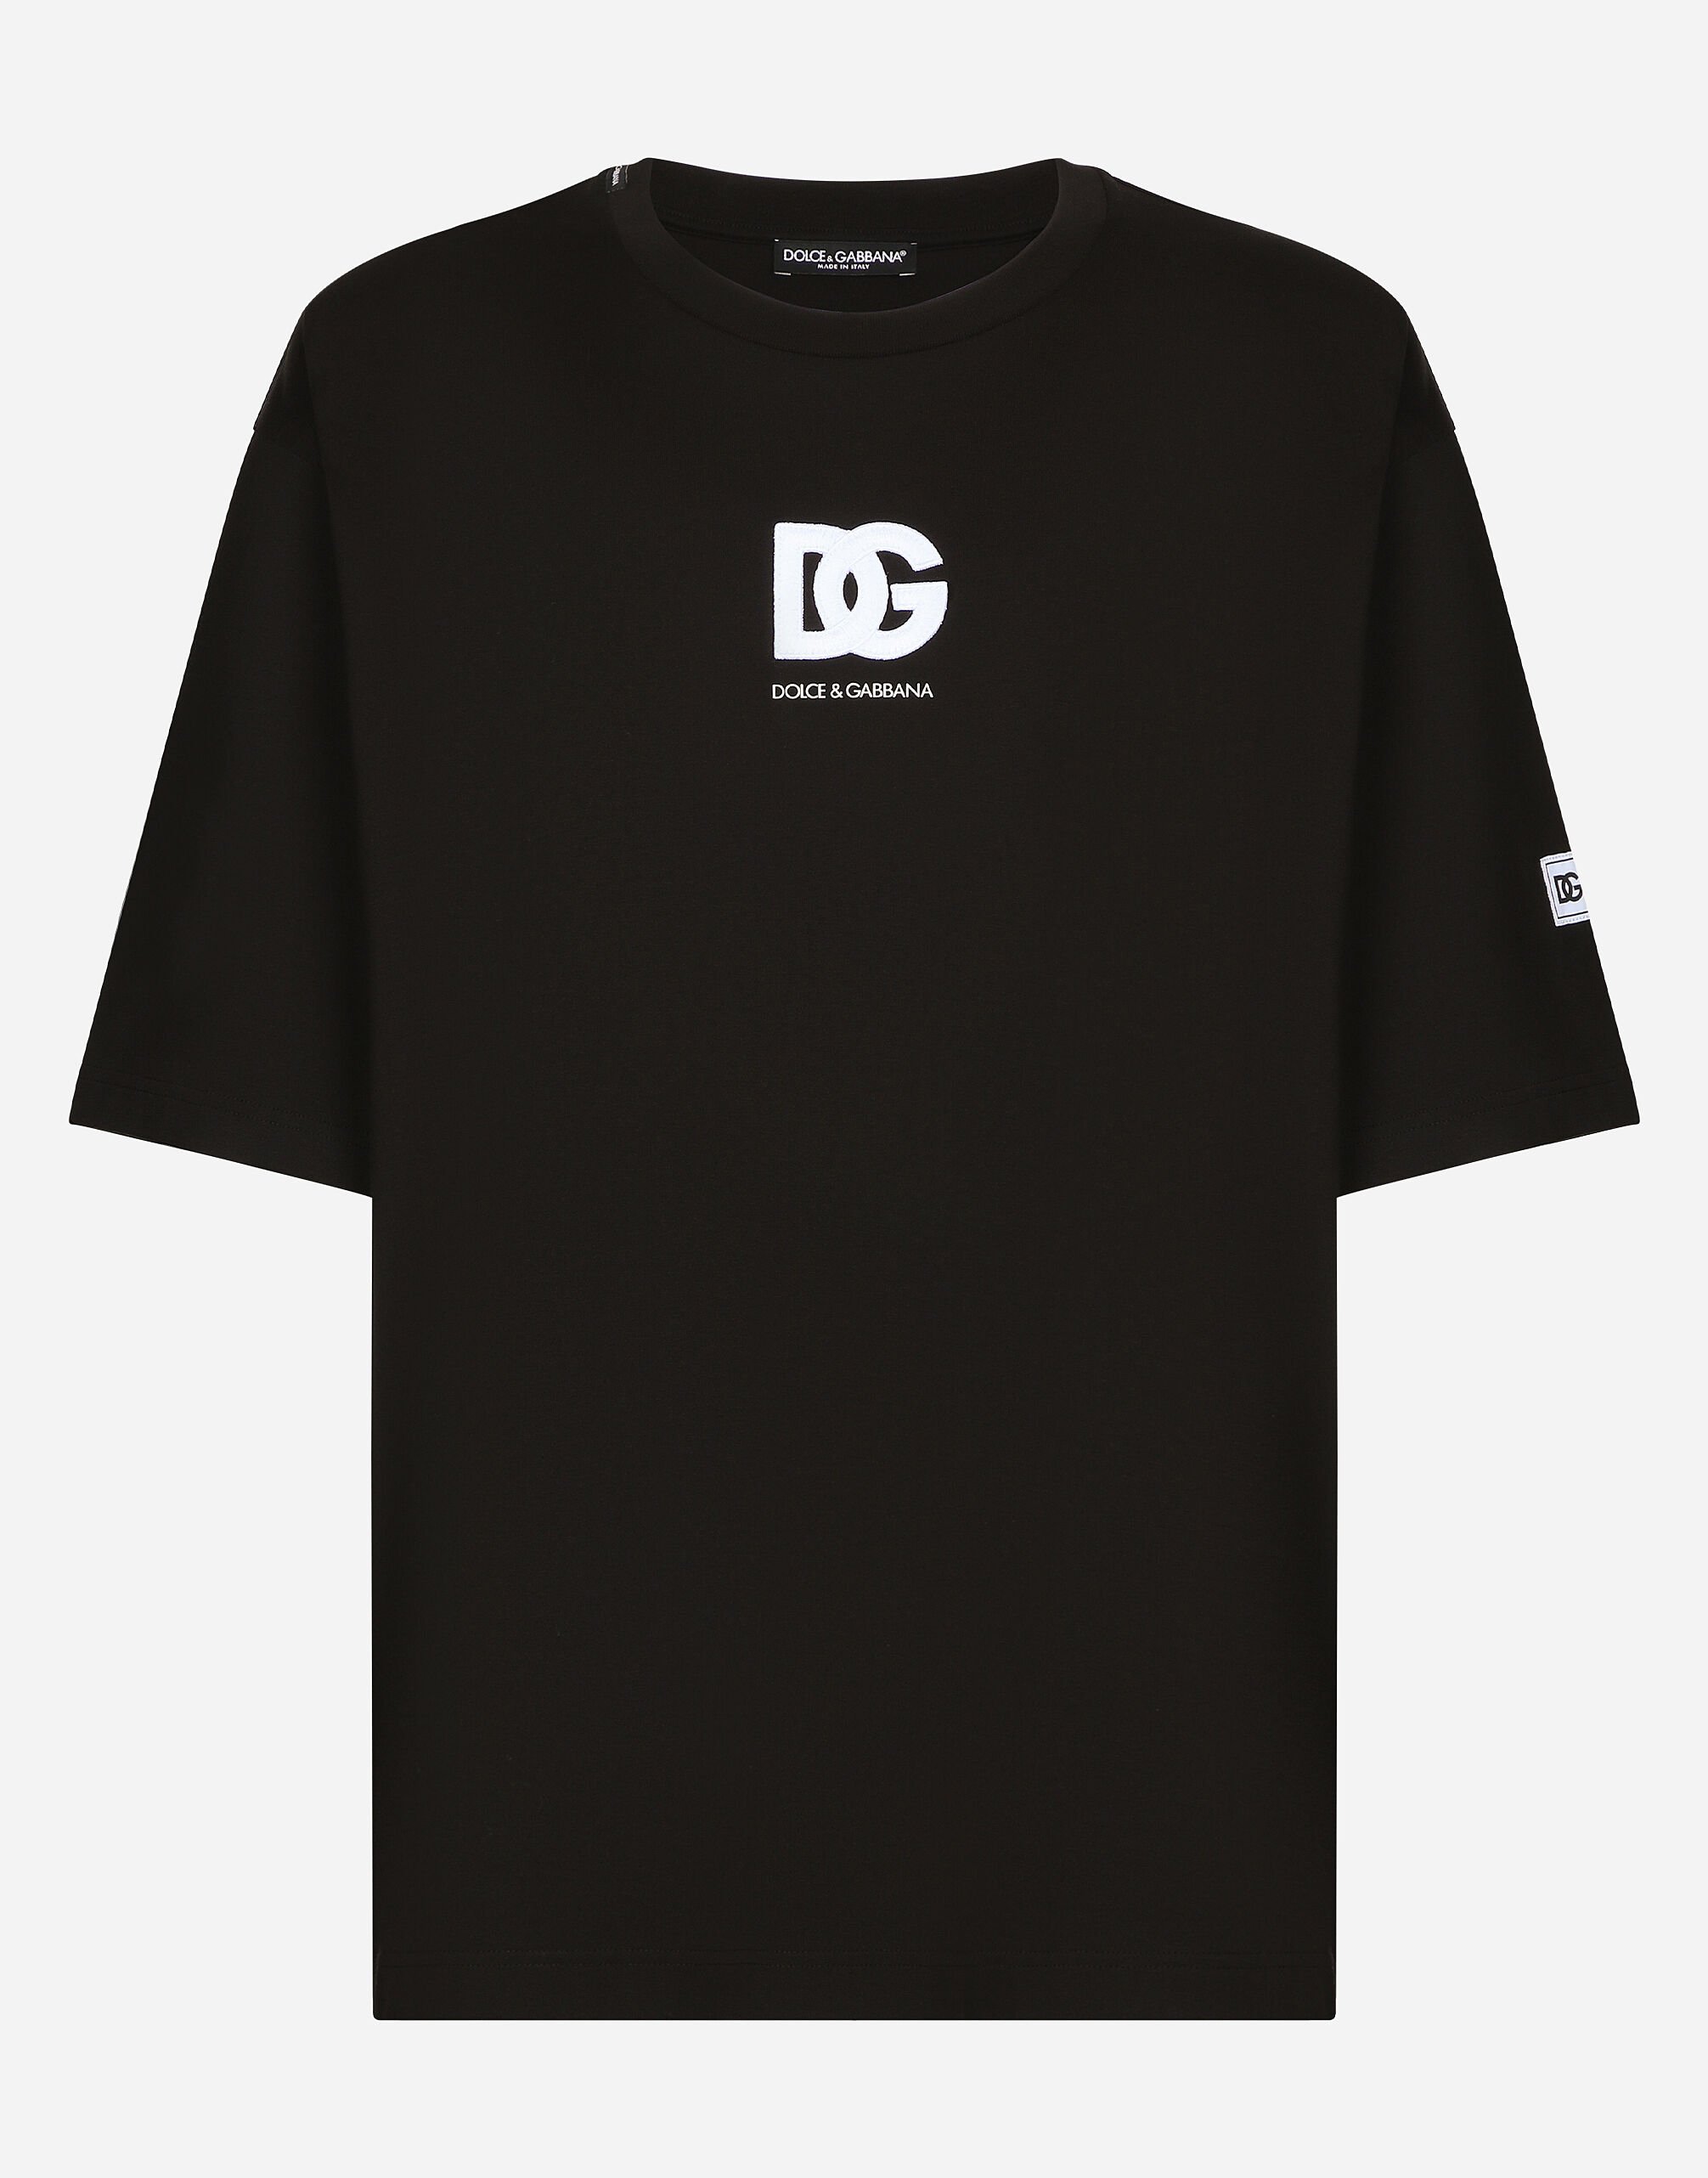 Dolce & Gabbana Short-sleeved T-shirt with DG logo patch Black G2PS2THJMOW